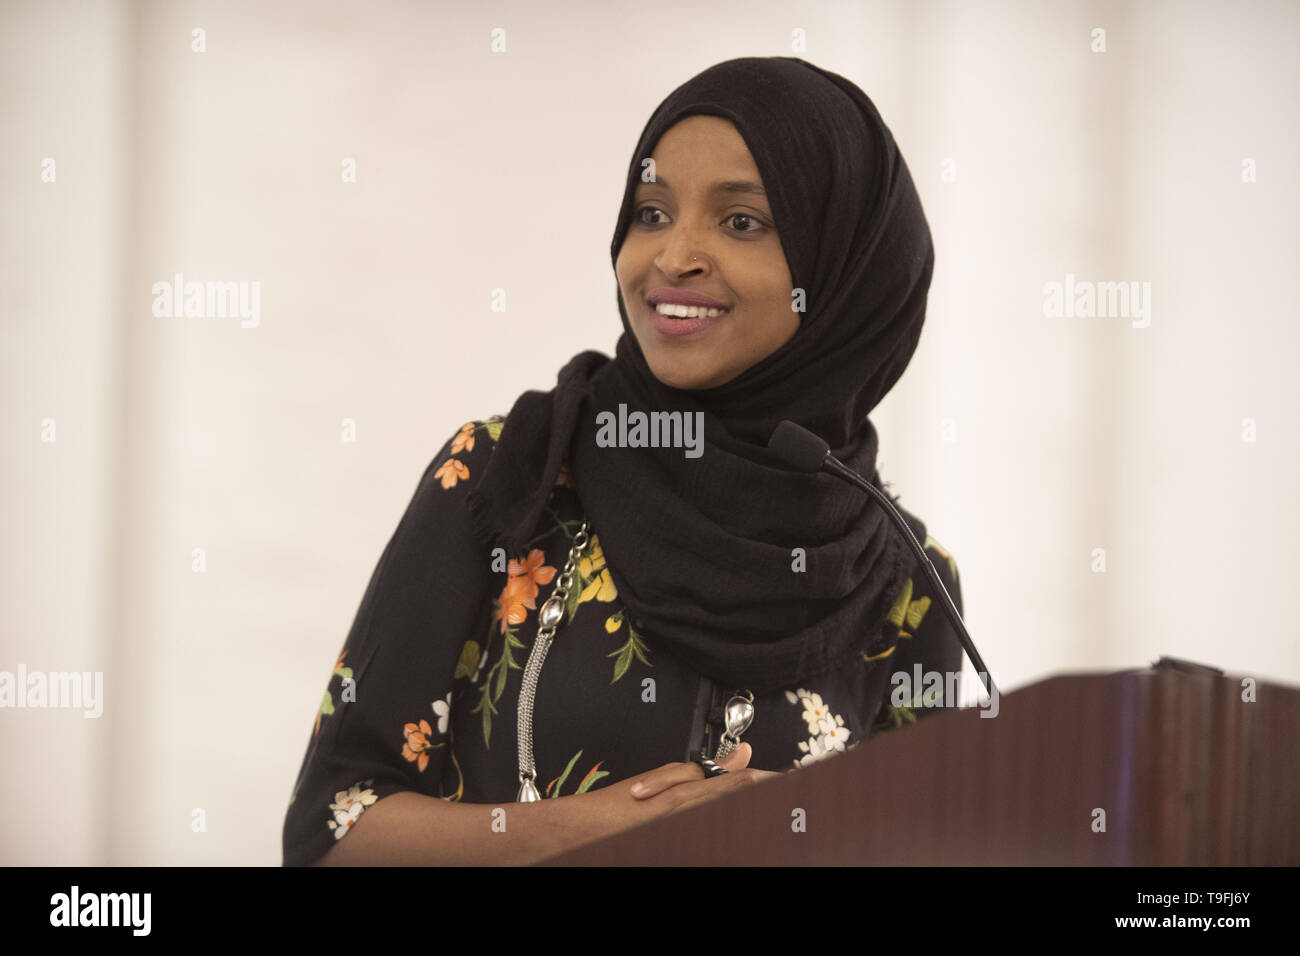 Texas, USA. 18th May, 2019. Congresswoman Ilhan Omar of Minnesota's 5th Congressional District speaks at Austin's annual city-wide iftar dinner in honor of the 14th day of Ramadan. Omar was joined by Mayor Steve Adler to call for peace and harmony in today's divisive climate. Credit: ZUMA Press, Inc./Alamy Live News Stock Photo